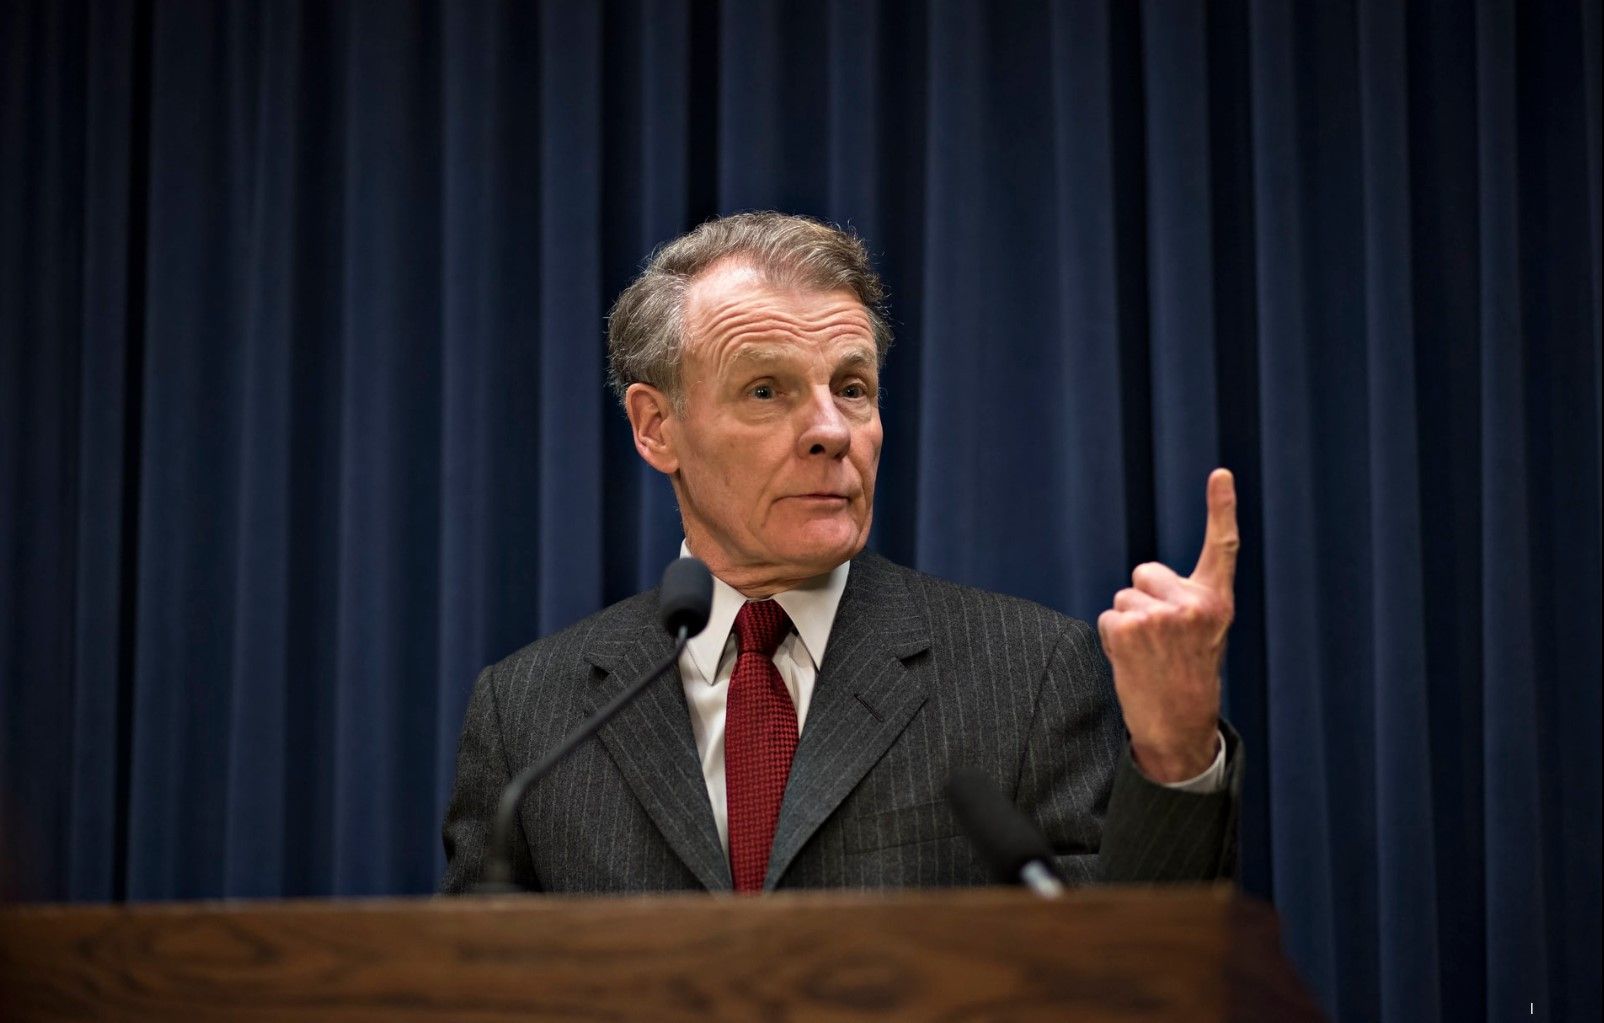 Madigan indictment certain to loom large over 2022 election